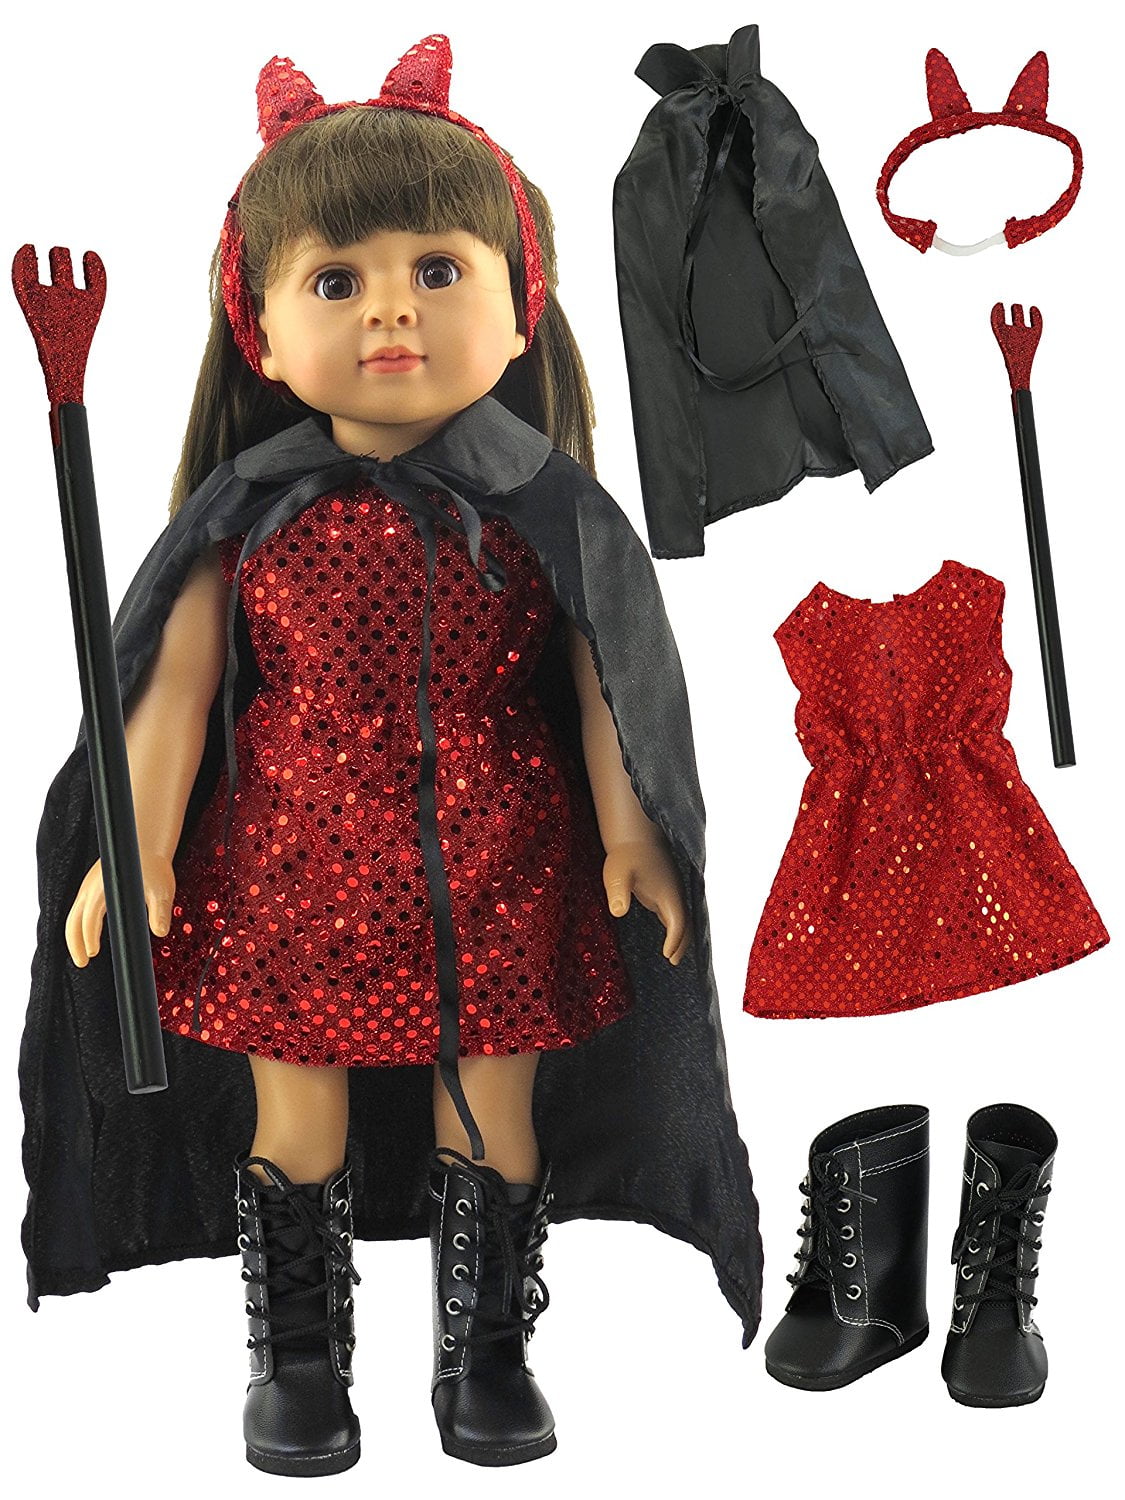 Doll Costume 18 Inch Costume Pirate Costume 18 Inch Doll Clothes American Girl Like Doll Costume Fits Like American Girl Doll,